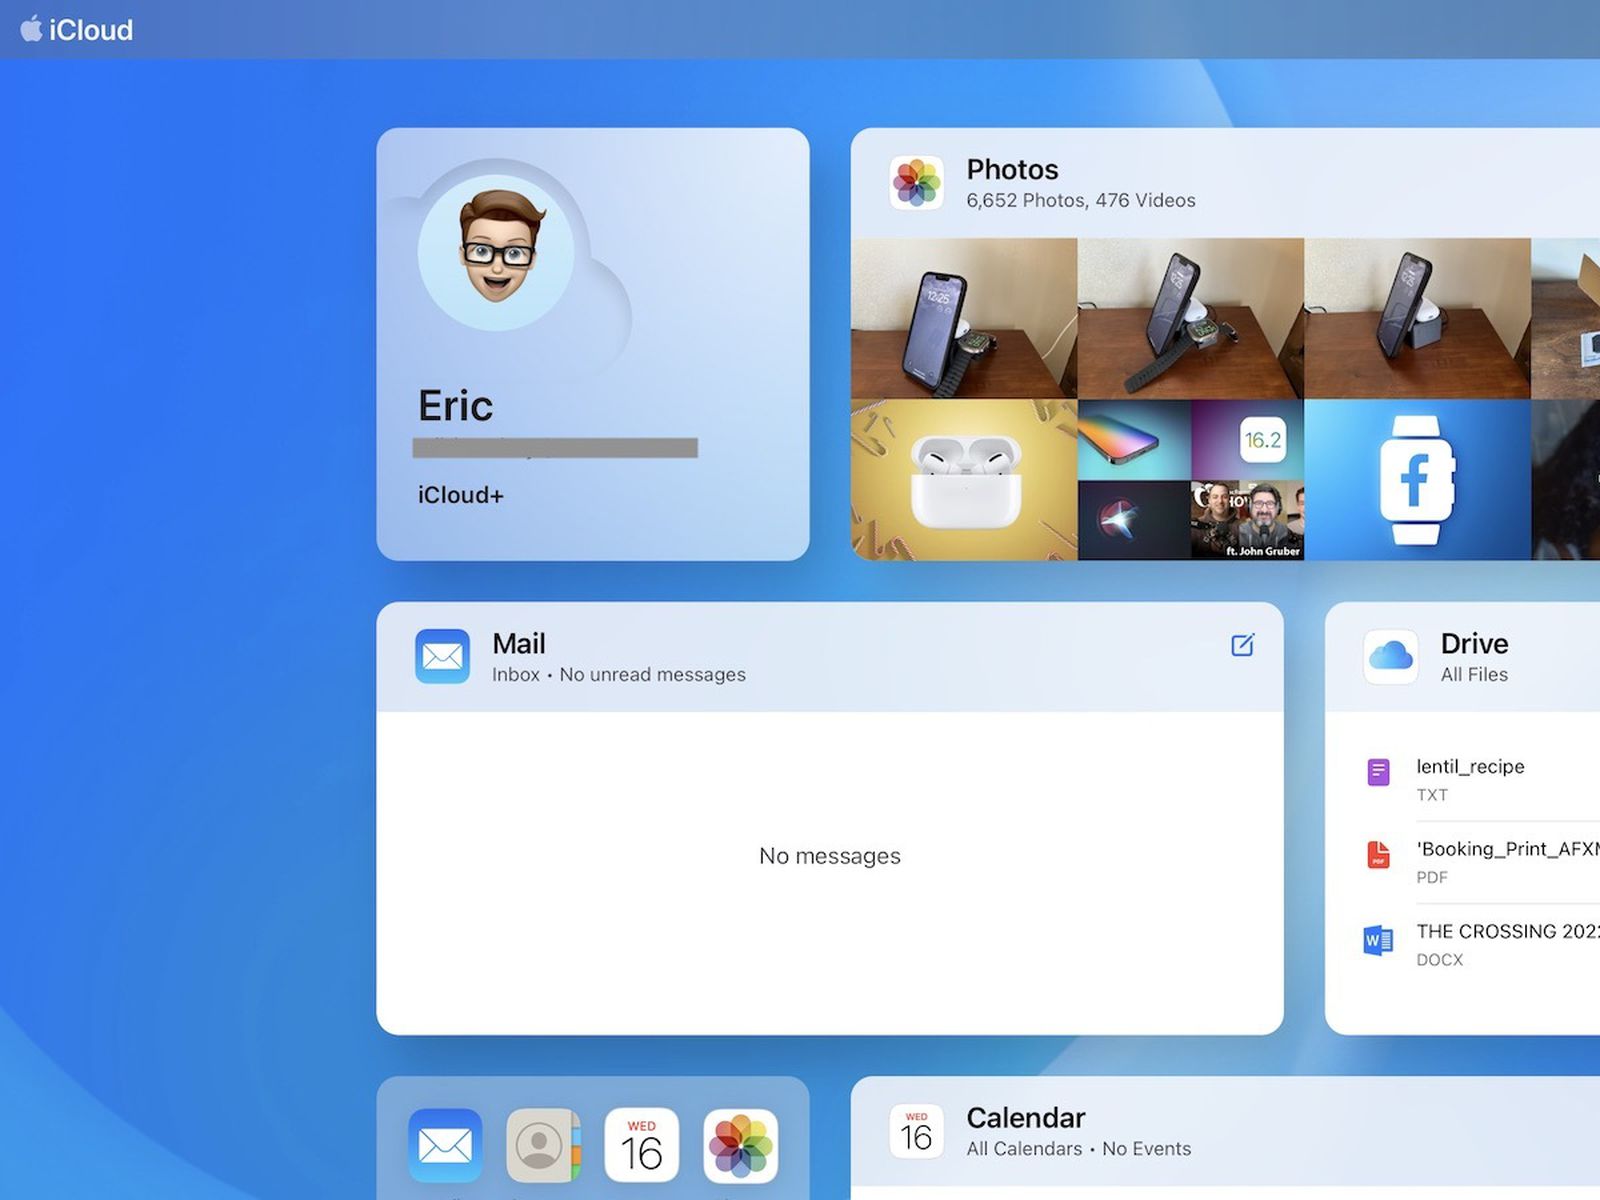 apple-unveils-redesigned-icloud-app-for-windows-users